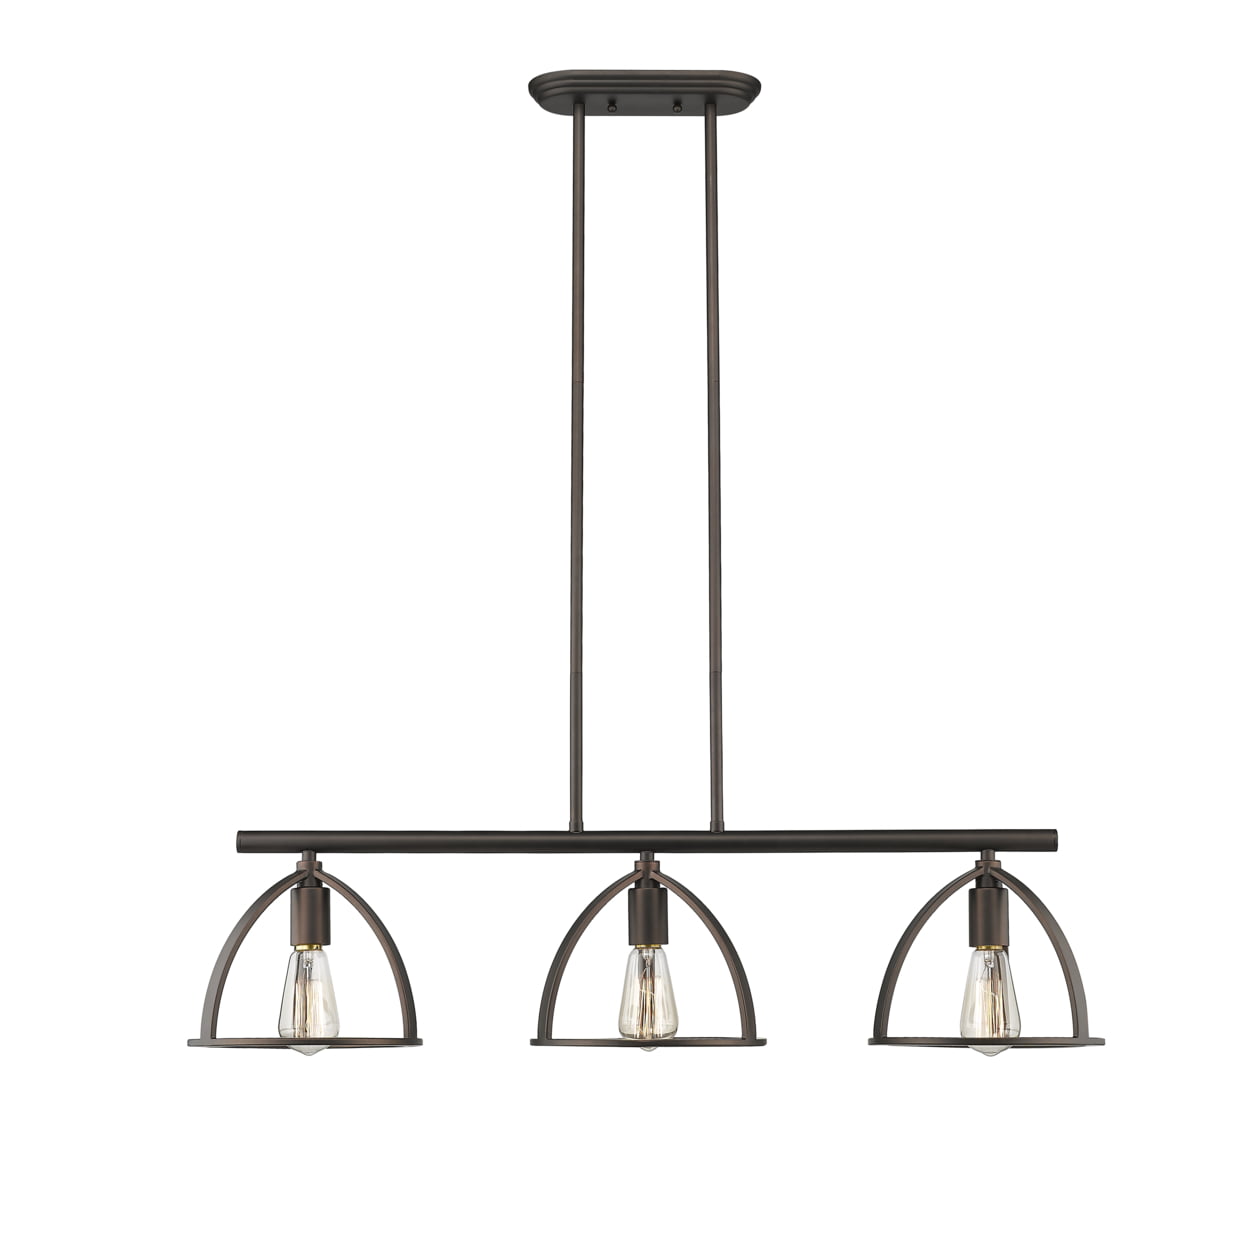 Ch2d503rb35-il3 Ironclad Industrial 3 Light Rubbed Bronze Island Pendant - 35 In.